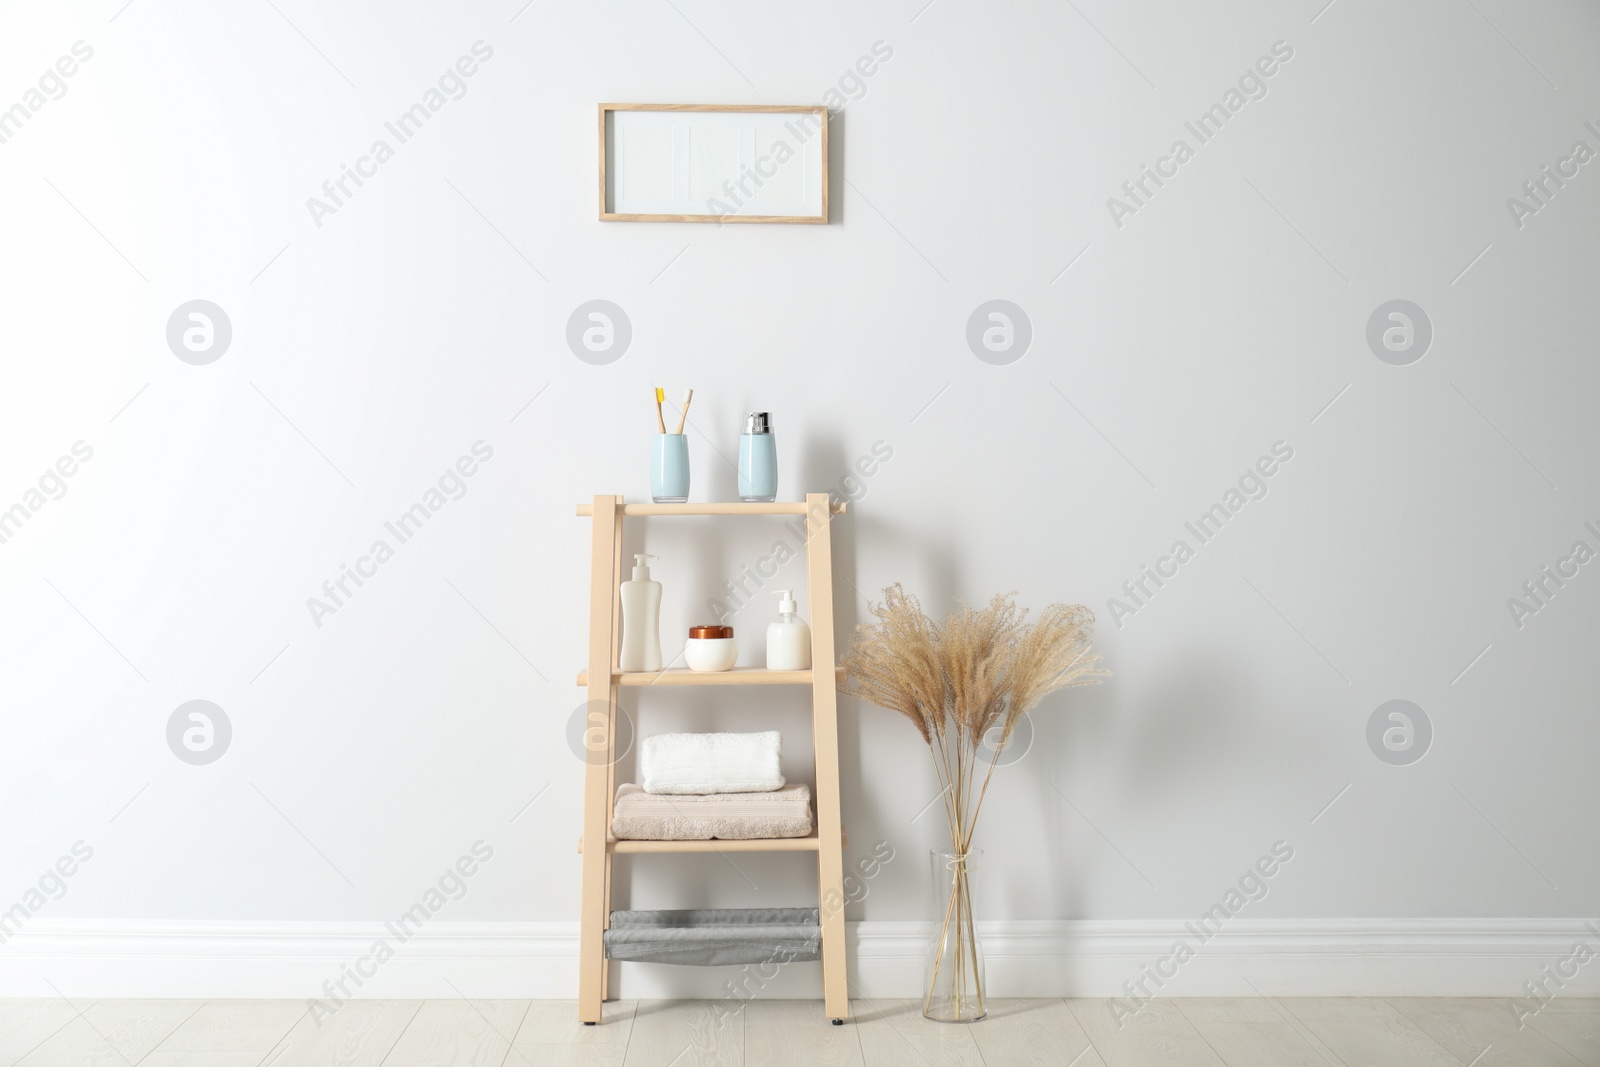 Photo of Wooden shelving unit with toiletries near white wall indoors. Bathroom interior element